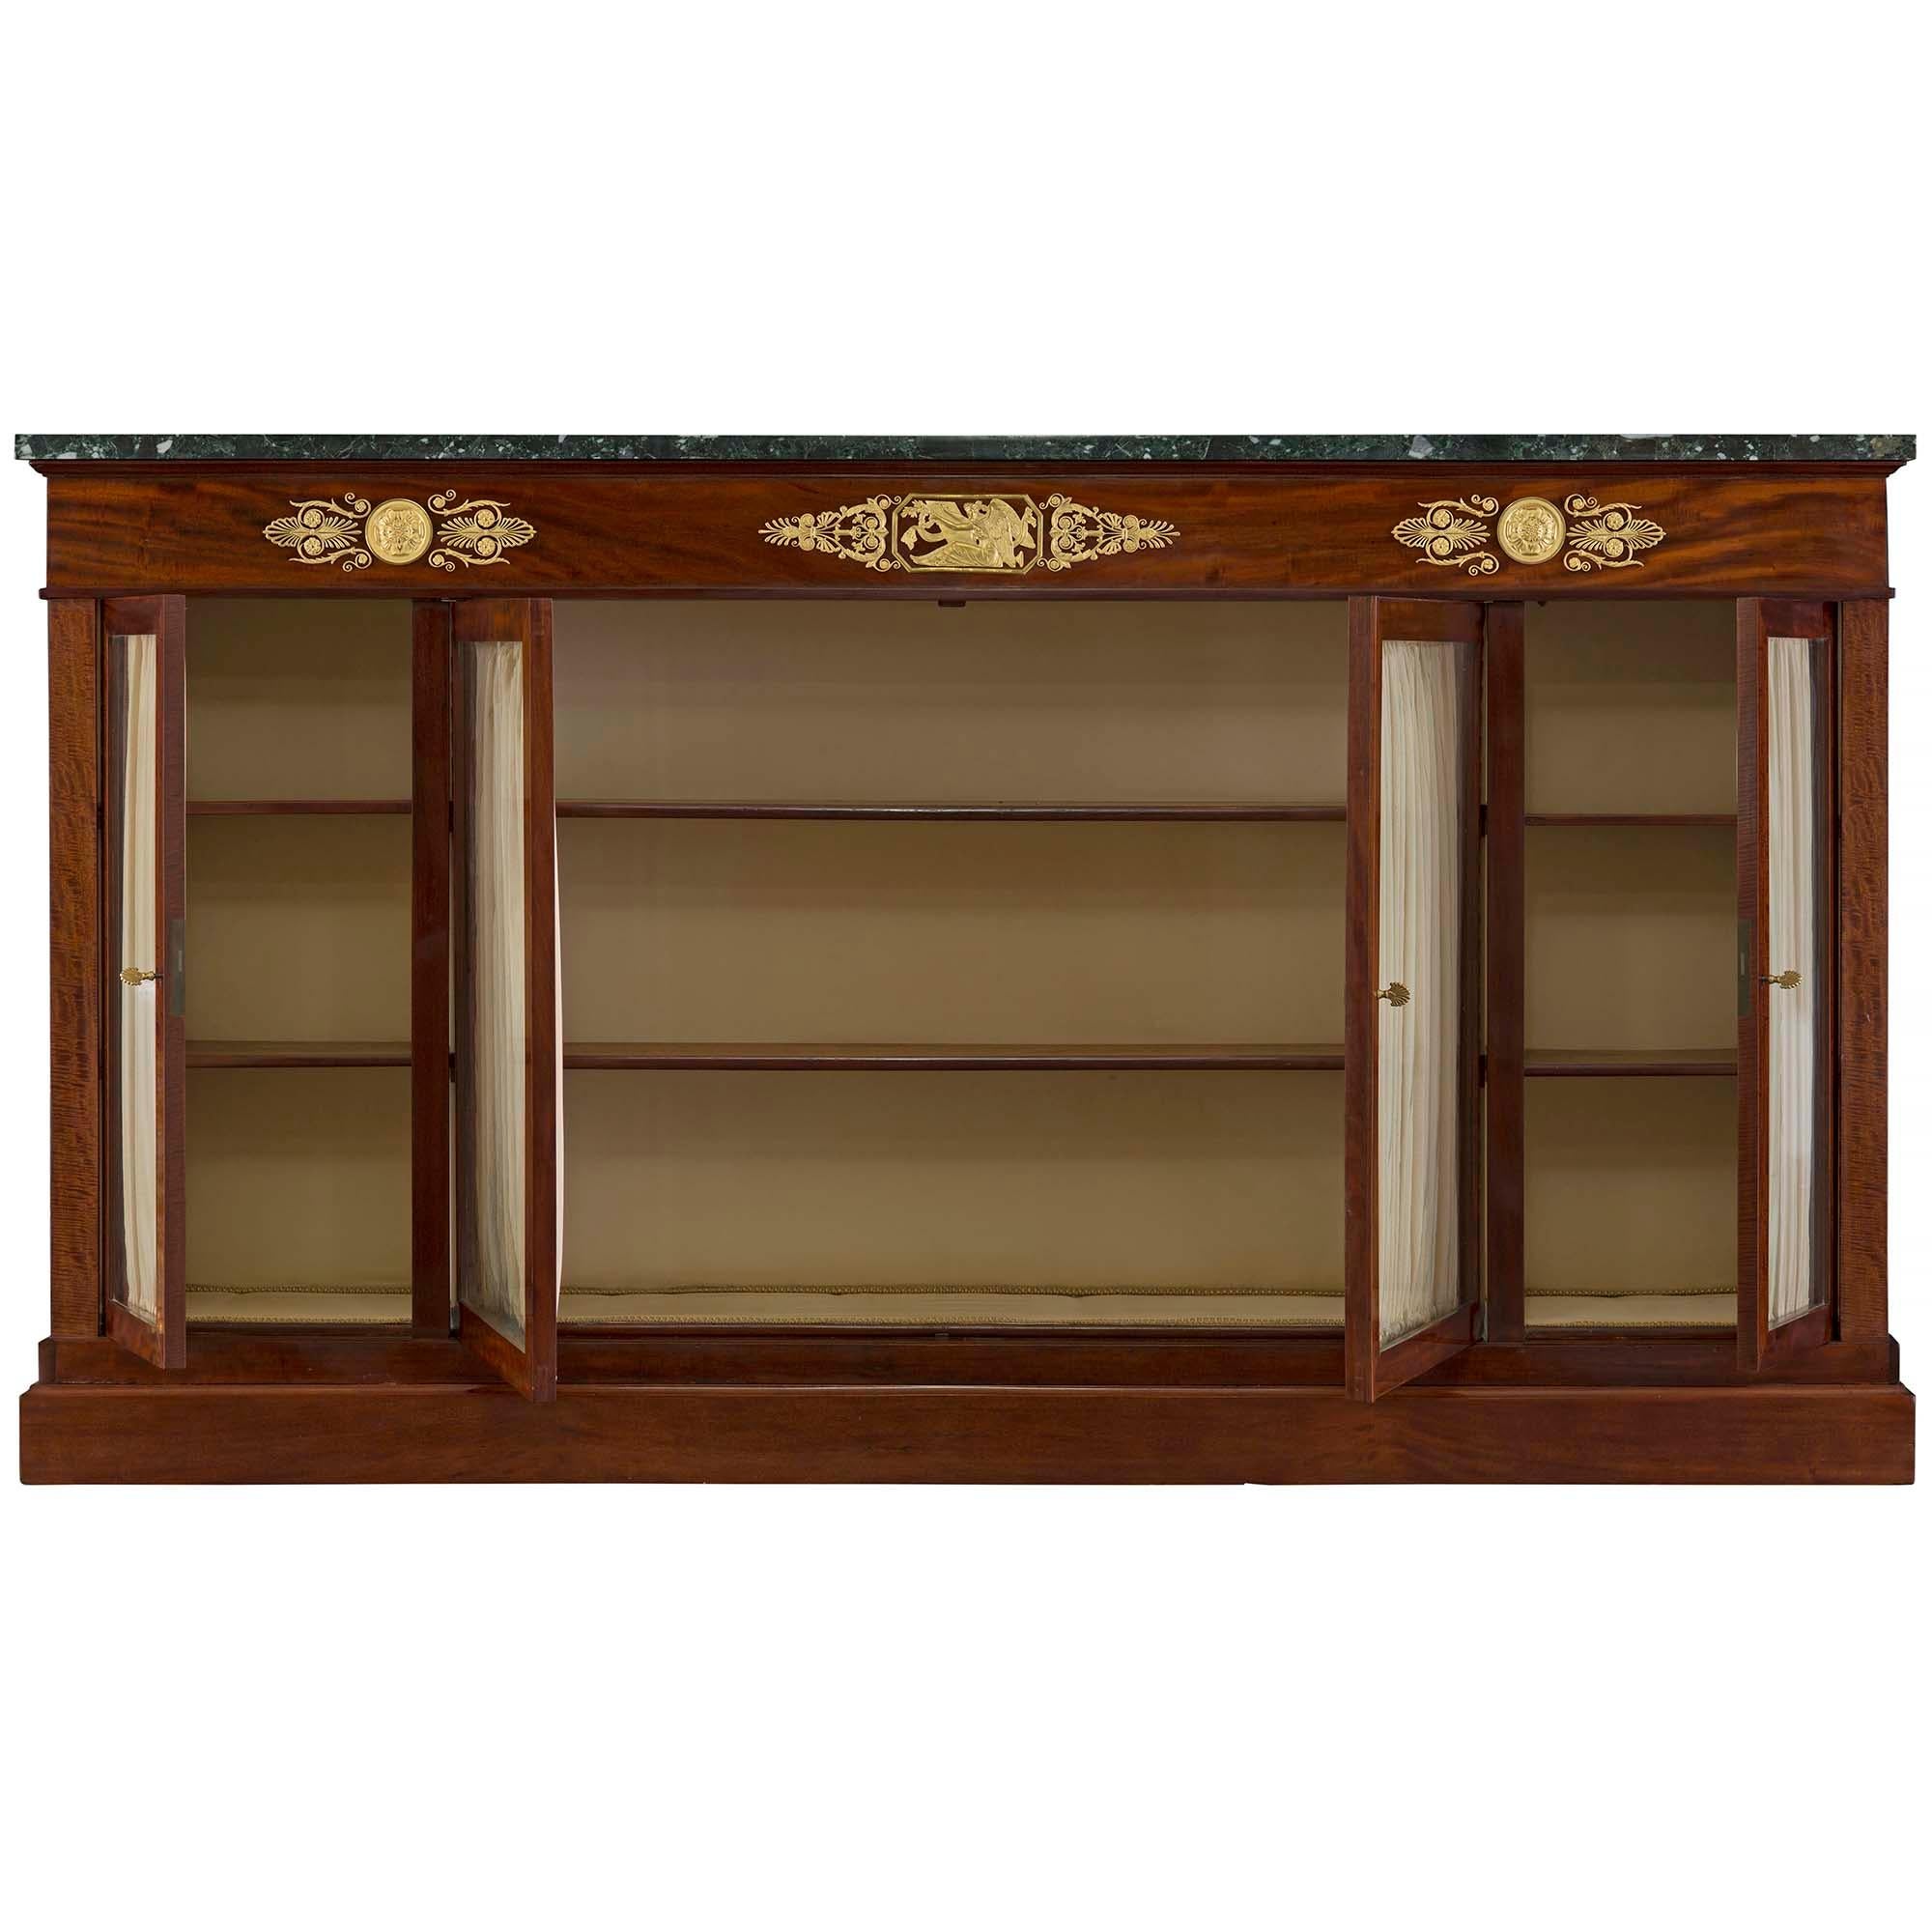 French 19th Century 1st Empire Period Mahogany, Ormolu and Marble Vitrine In Good Condition For Sale In West Palm Beach, FL